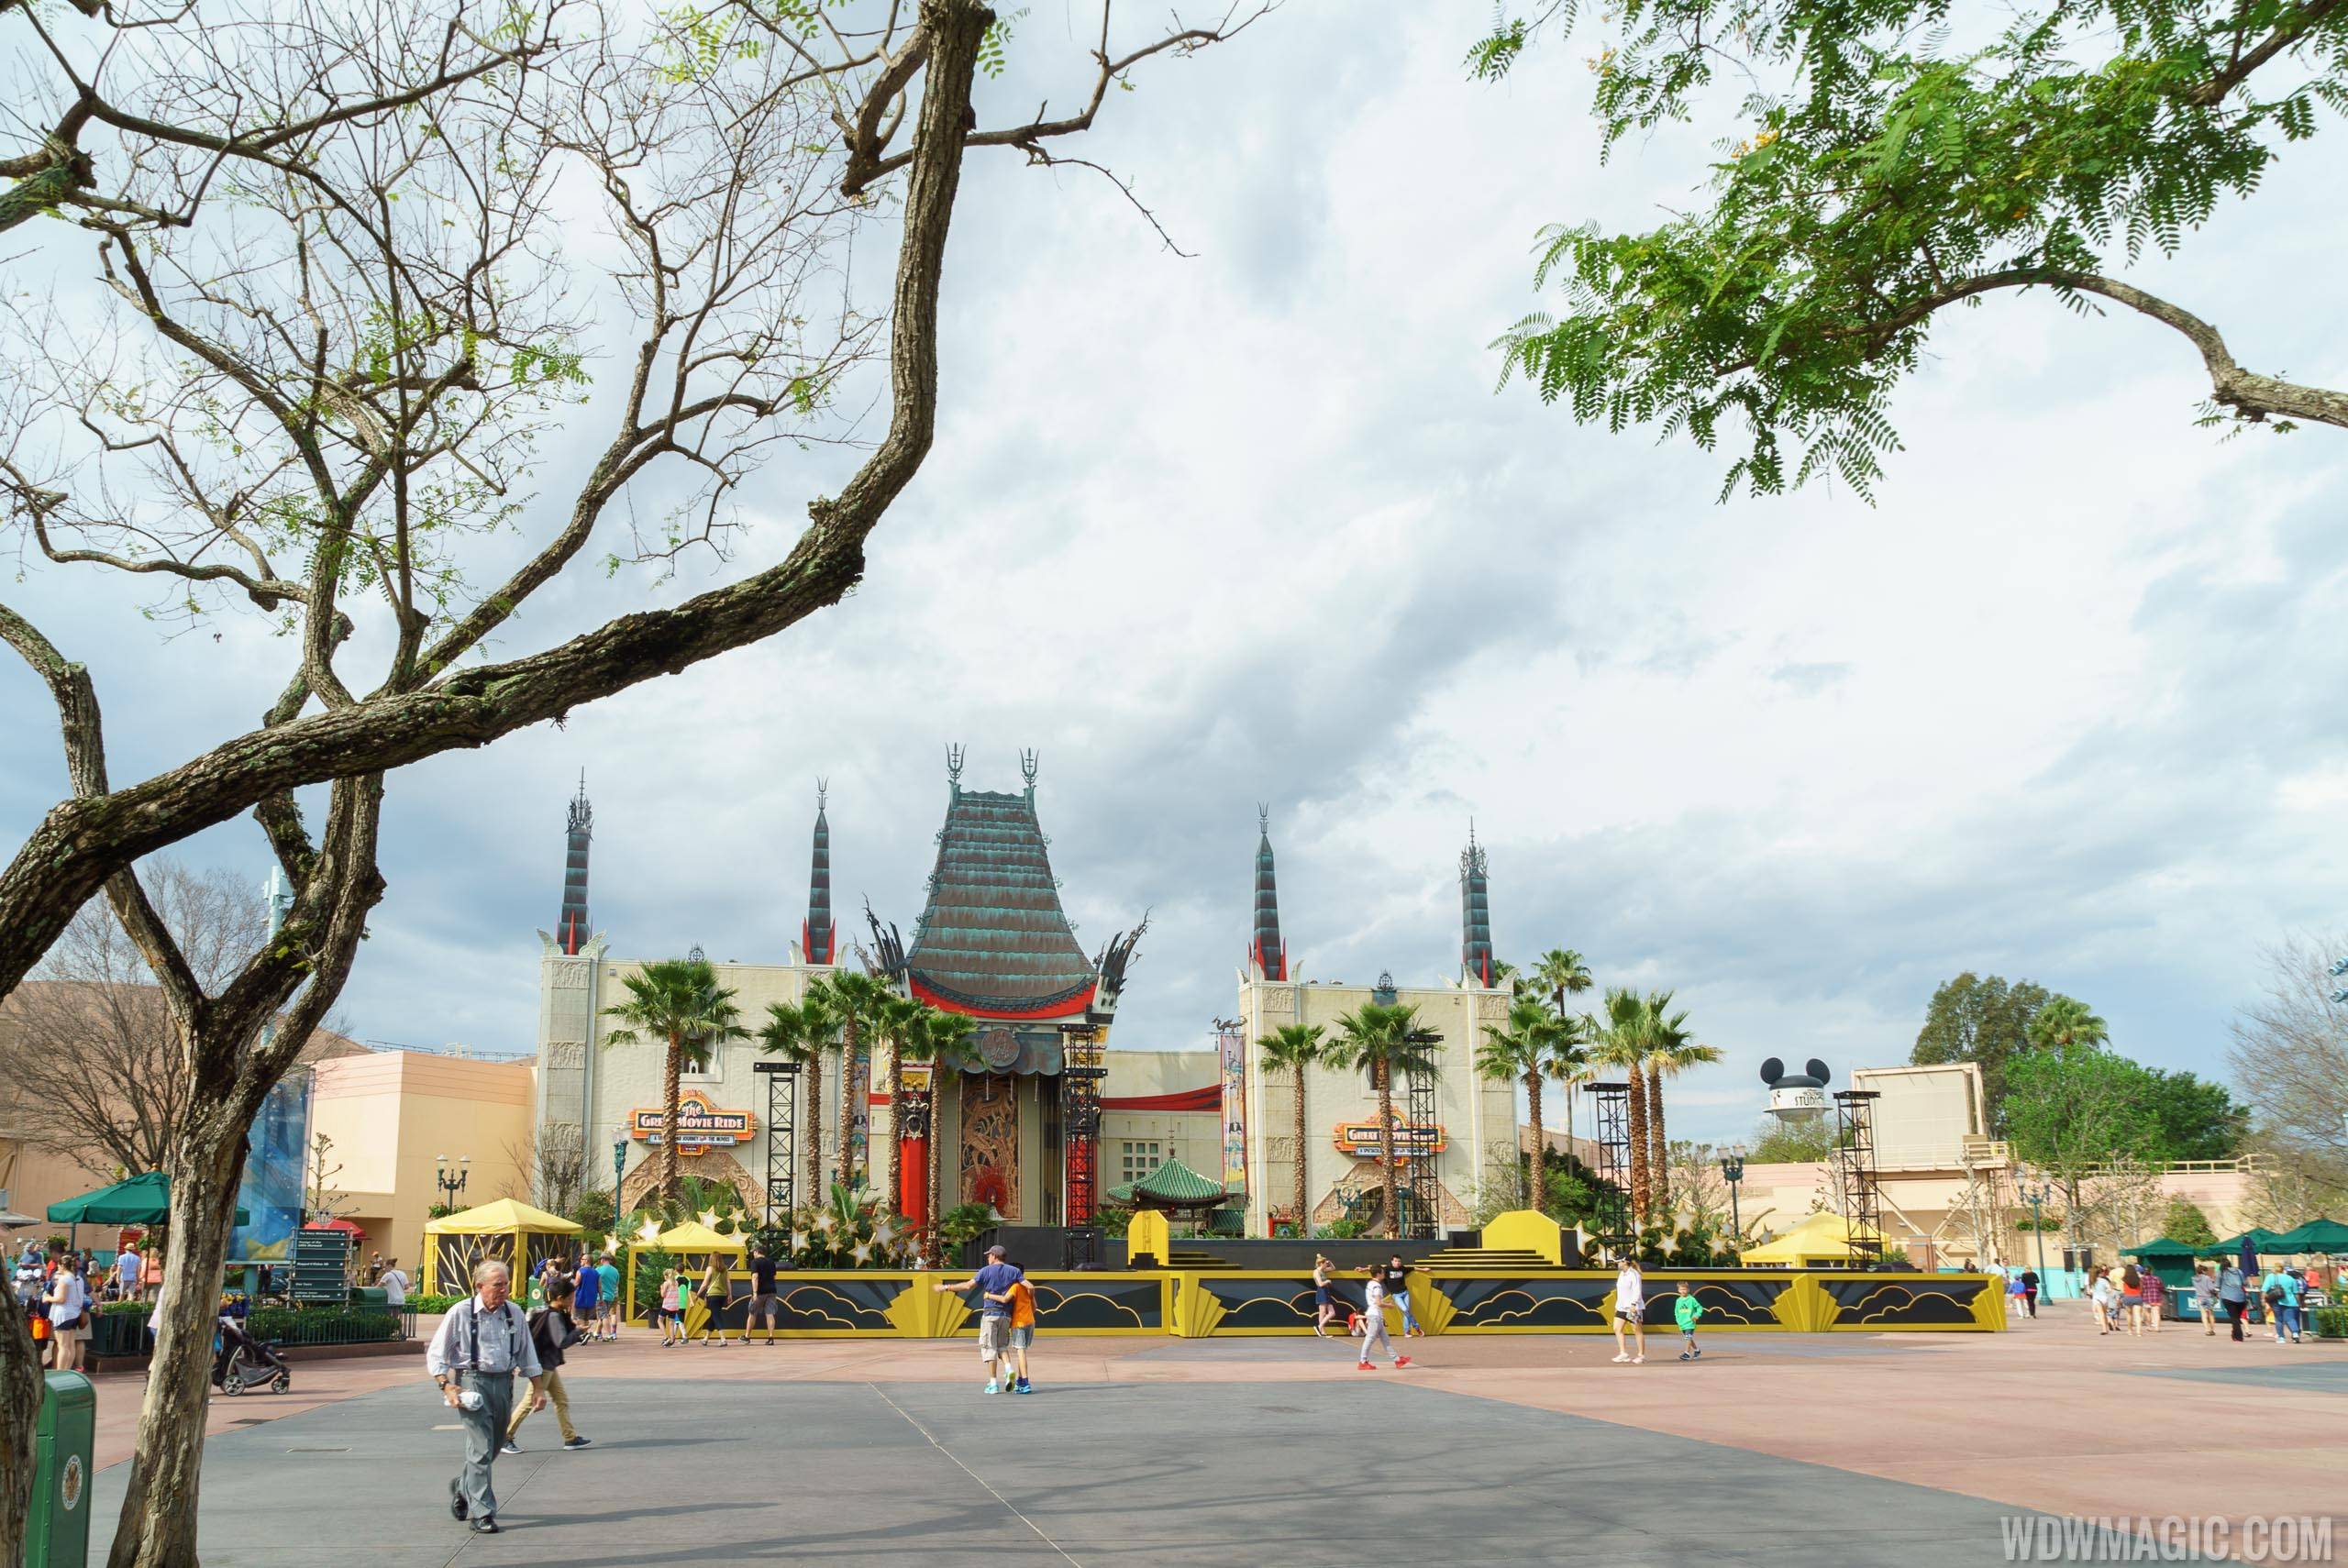 PHOTOS - Stage set for new Star Wars show at Disney's Hollywood Studios